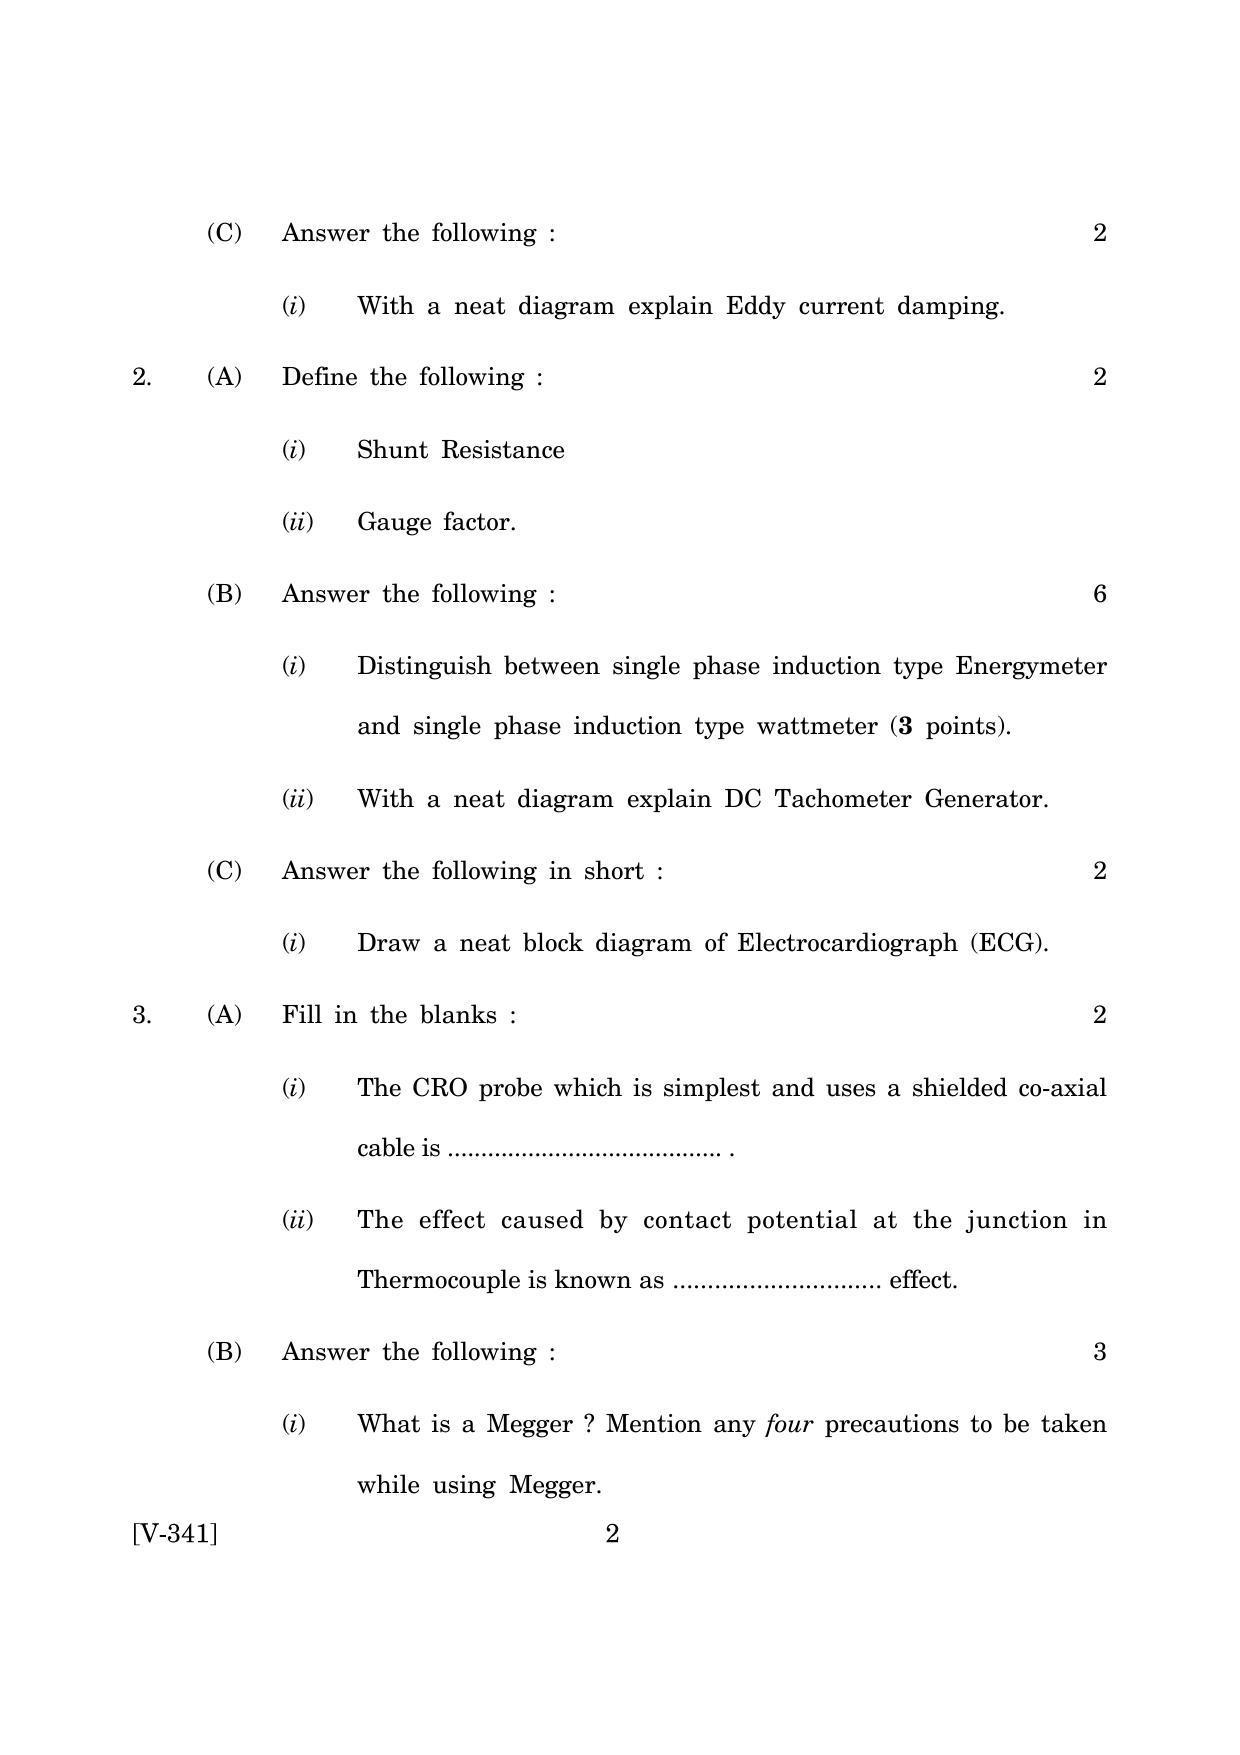 Goa Board Class 12 Electronic and Electrical Measurements  2019 (June 2019) Question Paper - Page 2